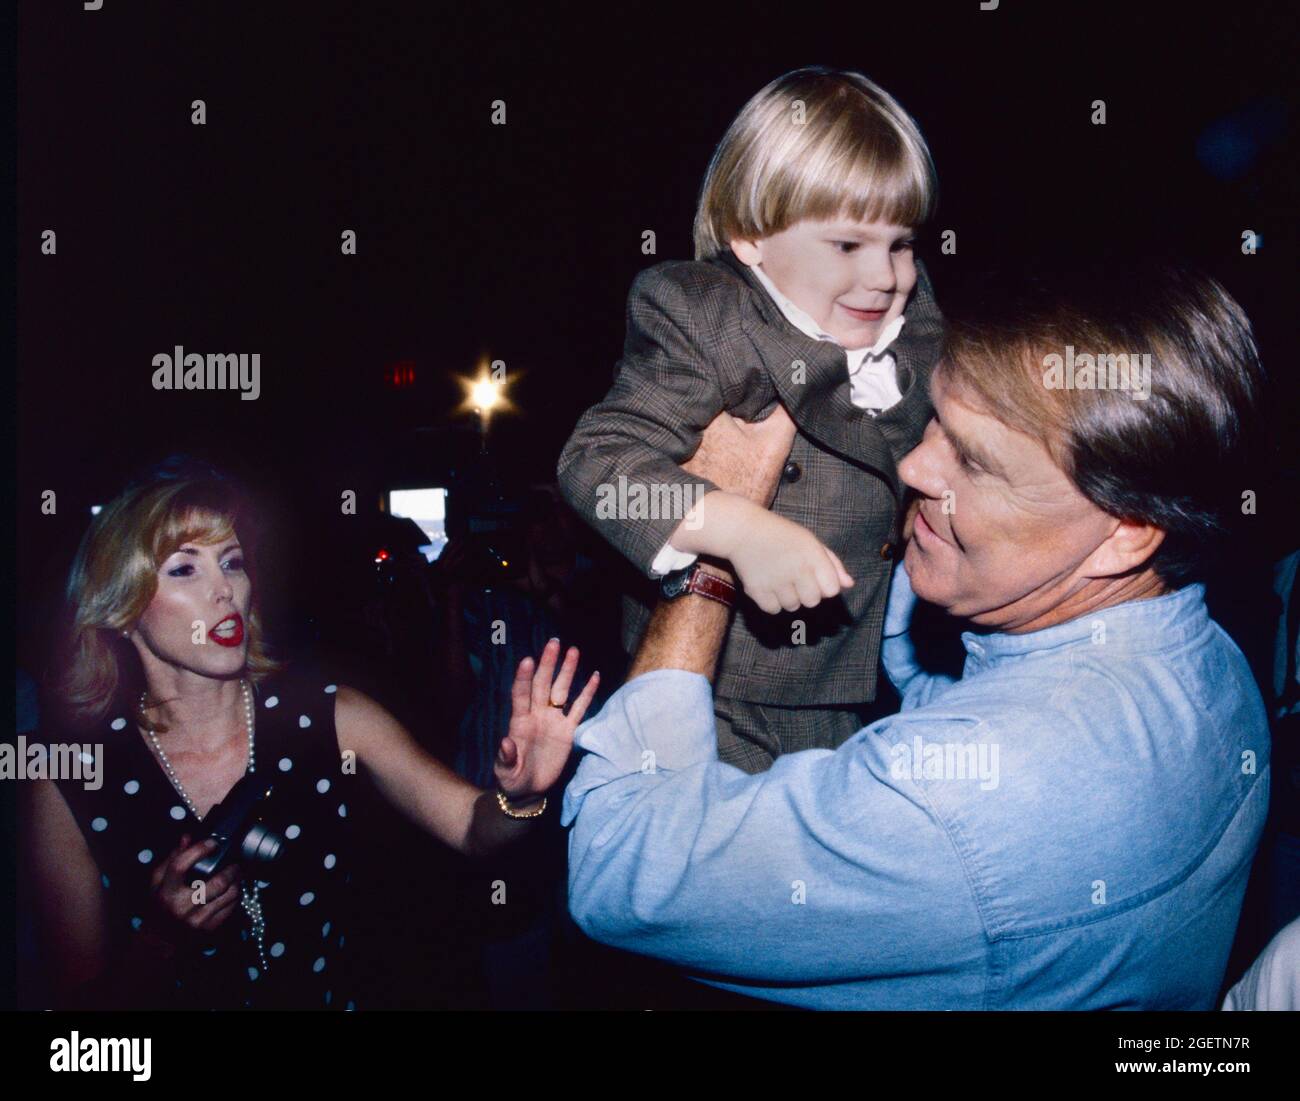 Glen Campbell lifts up one of the many young grandchildren, children, nieces and nephews who were part of his 60th birthday celebration on April 20th, 1996 in Branson, Missouri. The event was held two days before his actual birthday on April 22. Campbell's wife, Kim is at left. Stock Photo